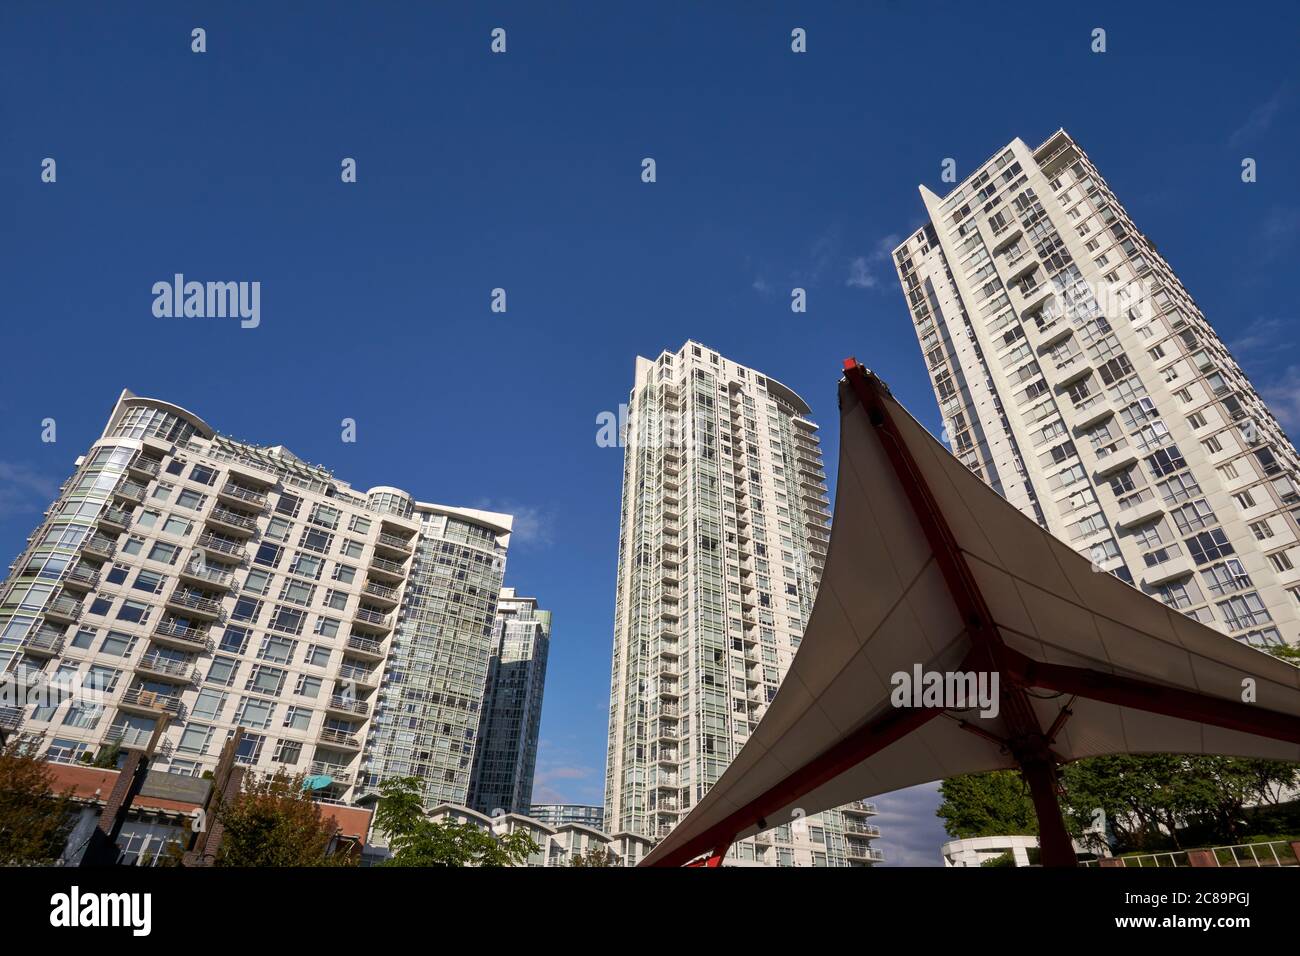 Residential towers and hydraulic crane in the RoundhoUse Turntable Plaza in Yaletown, Vancouver, British Columbia, Canada Stock Photo